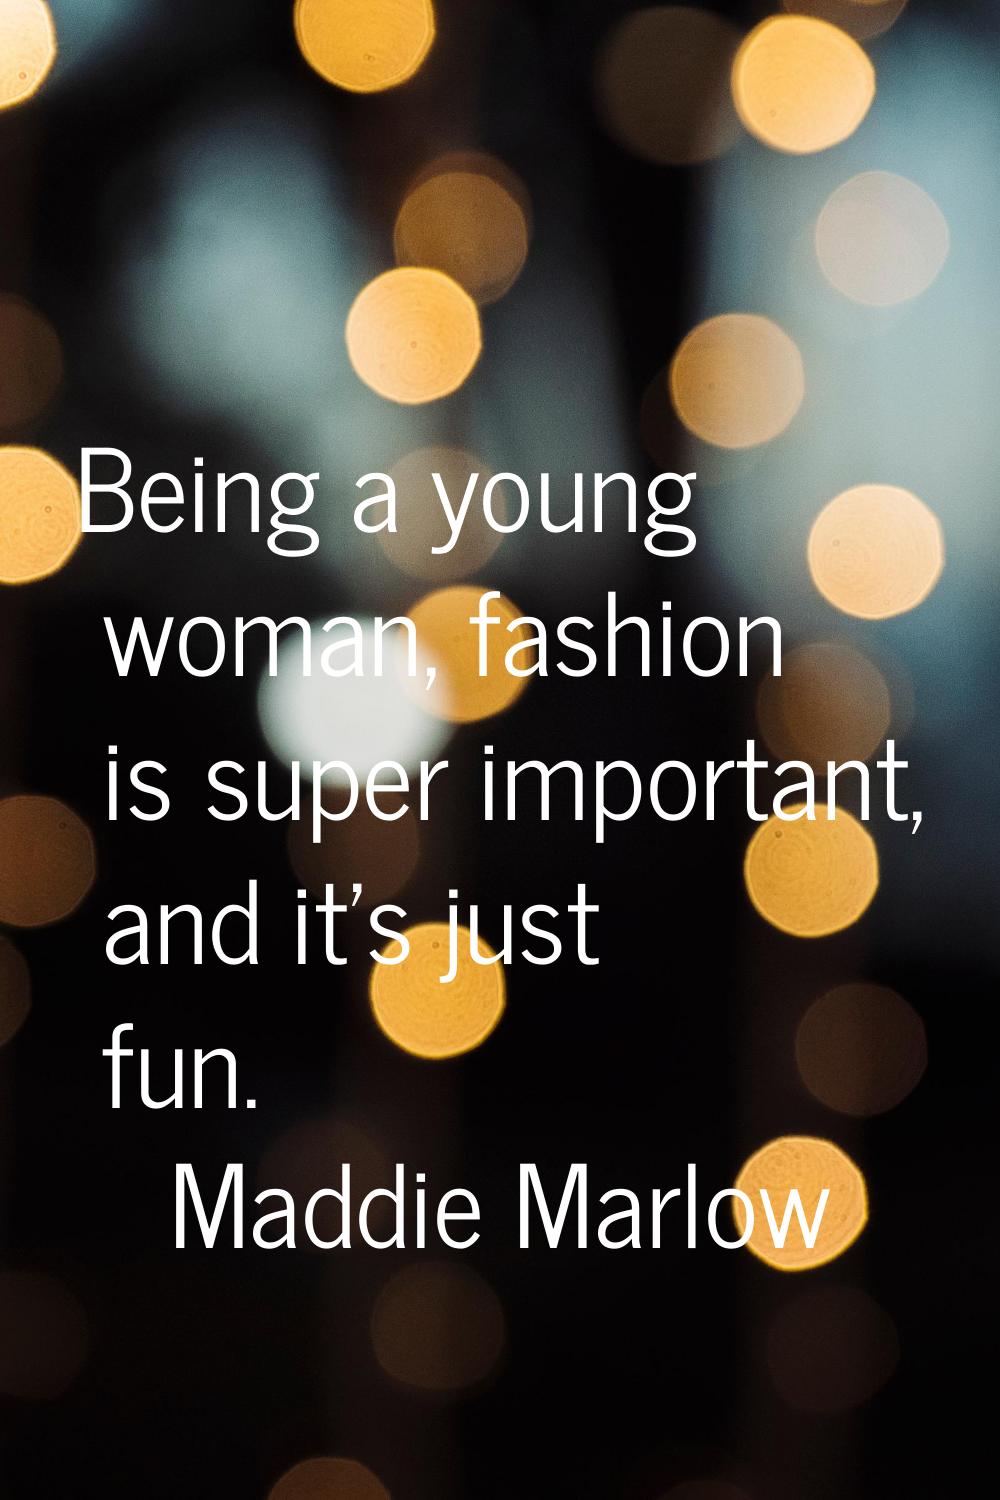 Being a young woman, fashion is super important, and it's just fun.